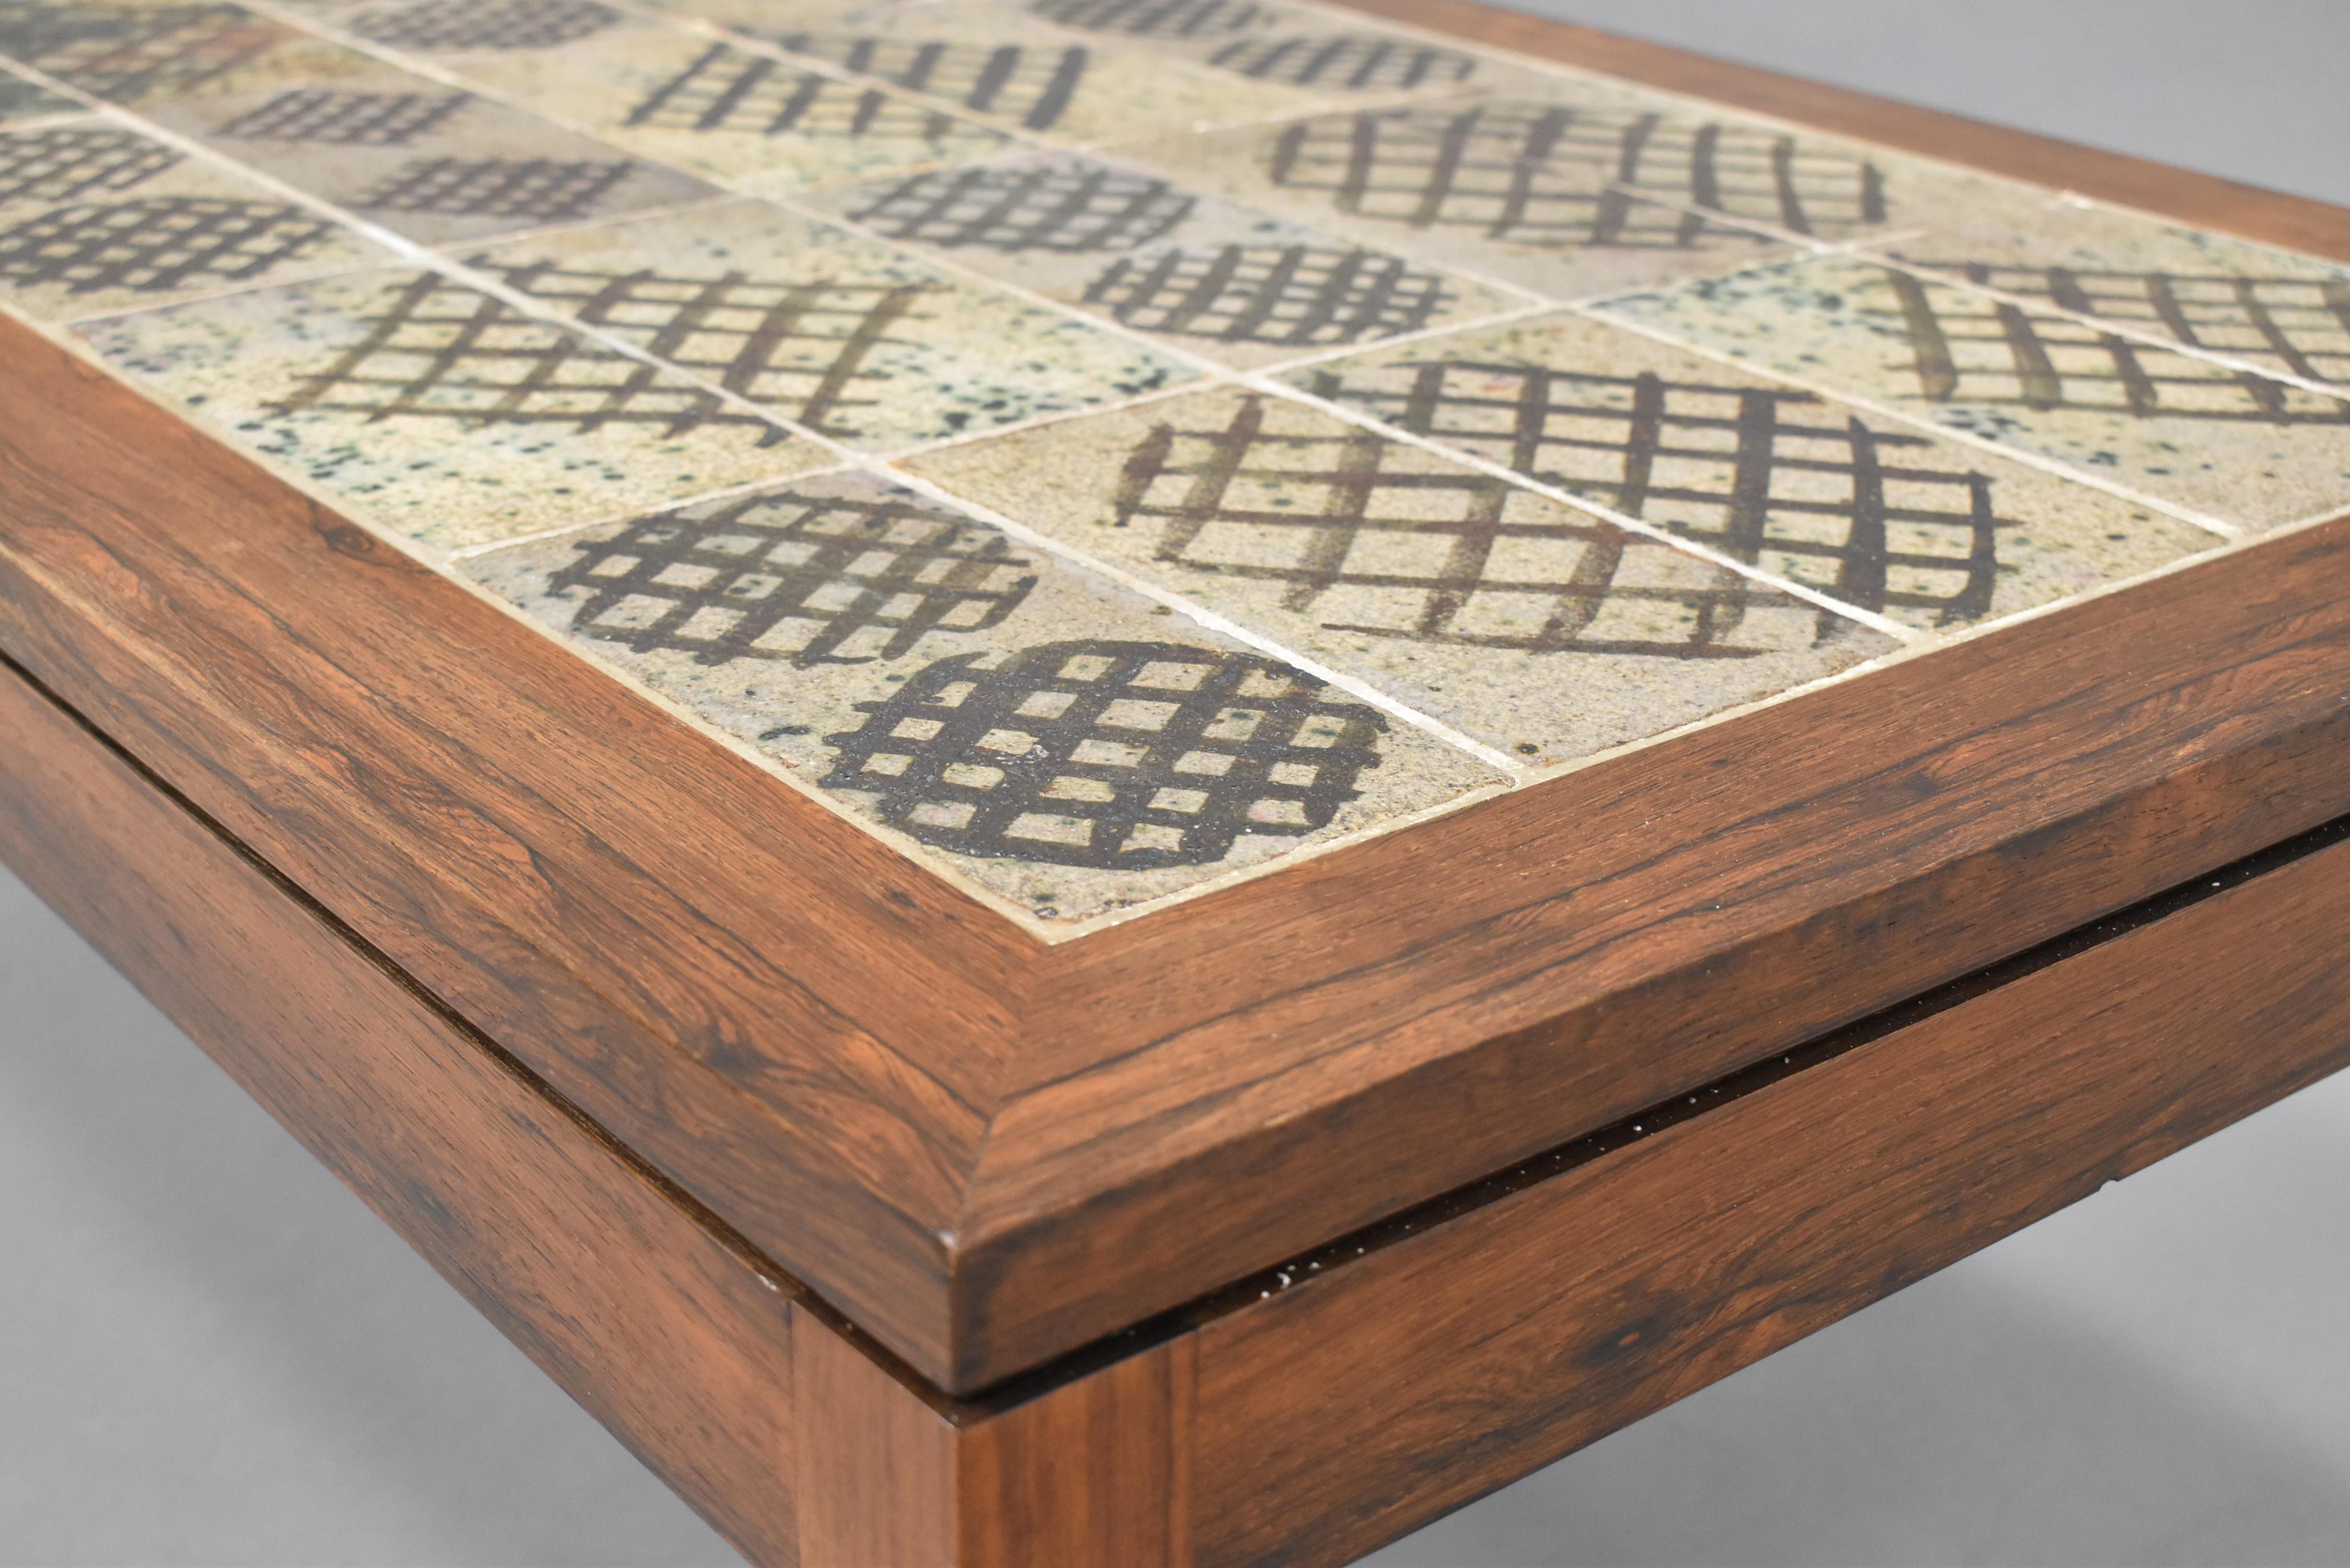 American Vintage Rosewood and Tile Coffee Table For Sale